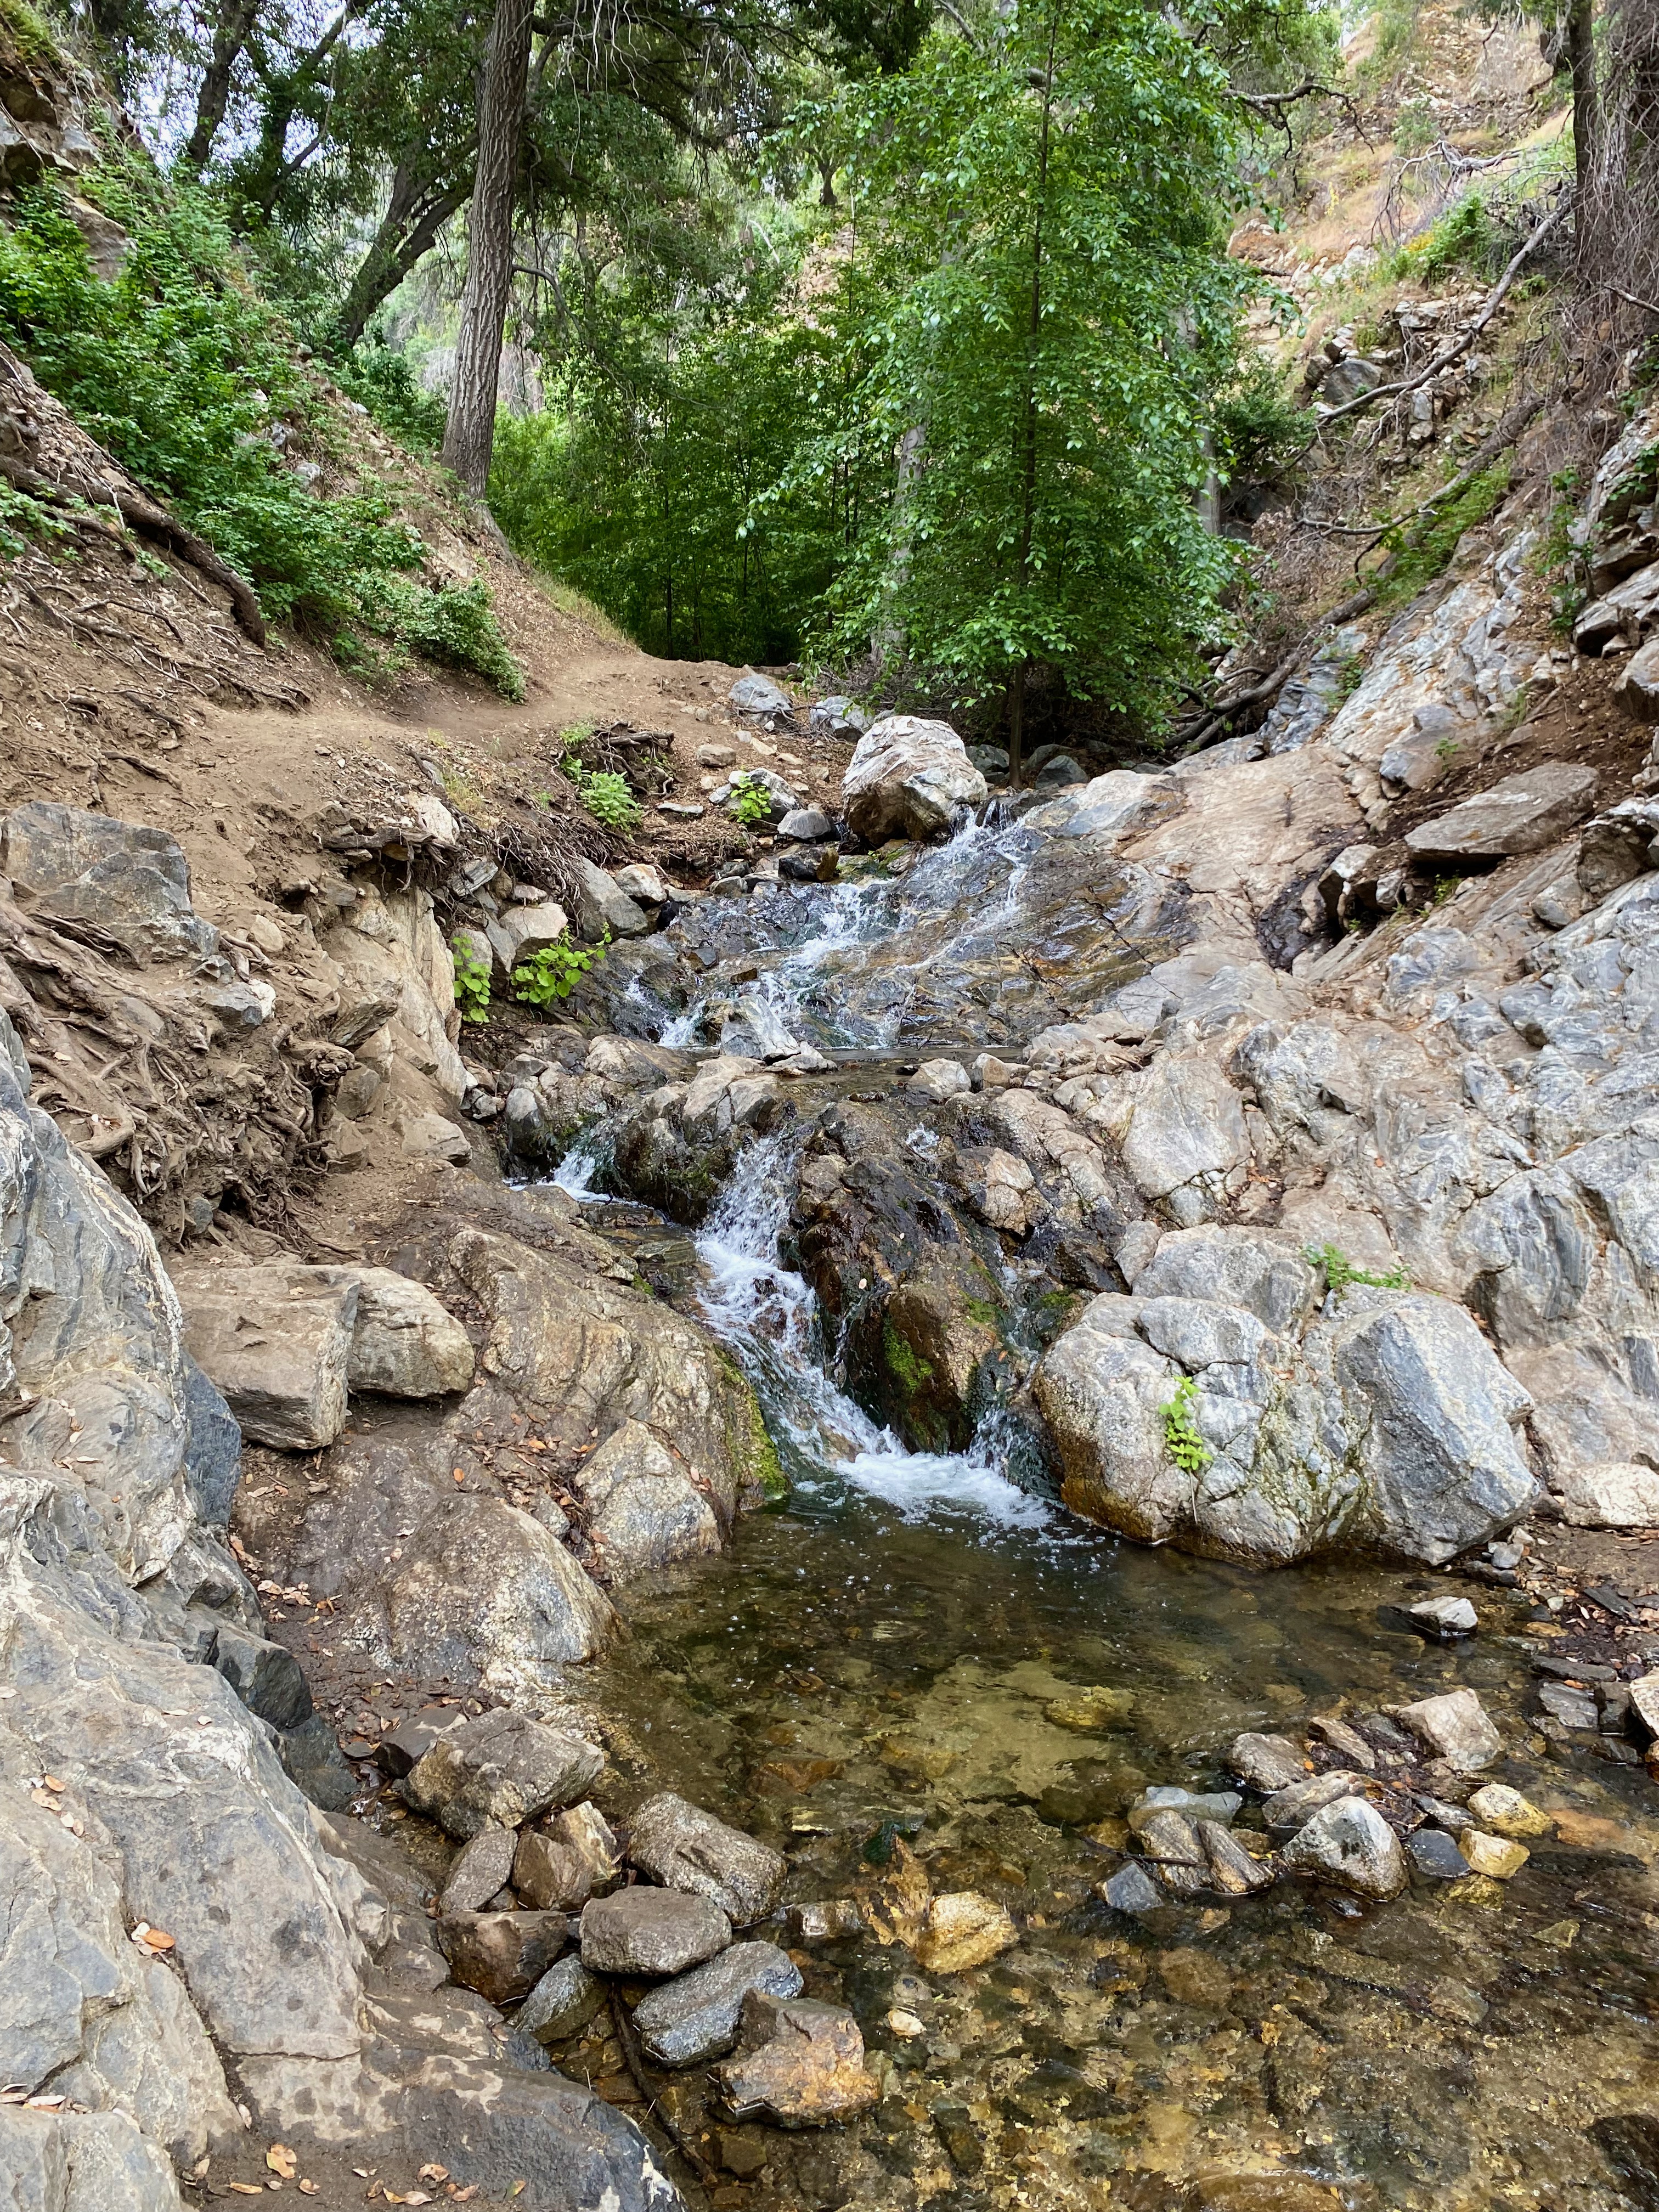 A shear creek crossing with steep rock faces and lots of loose boulders on the Waterfall trail at Placerita.